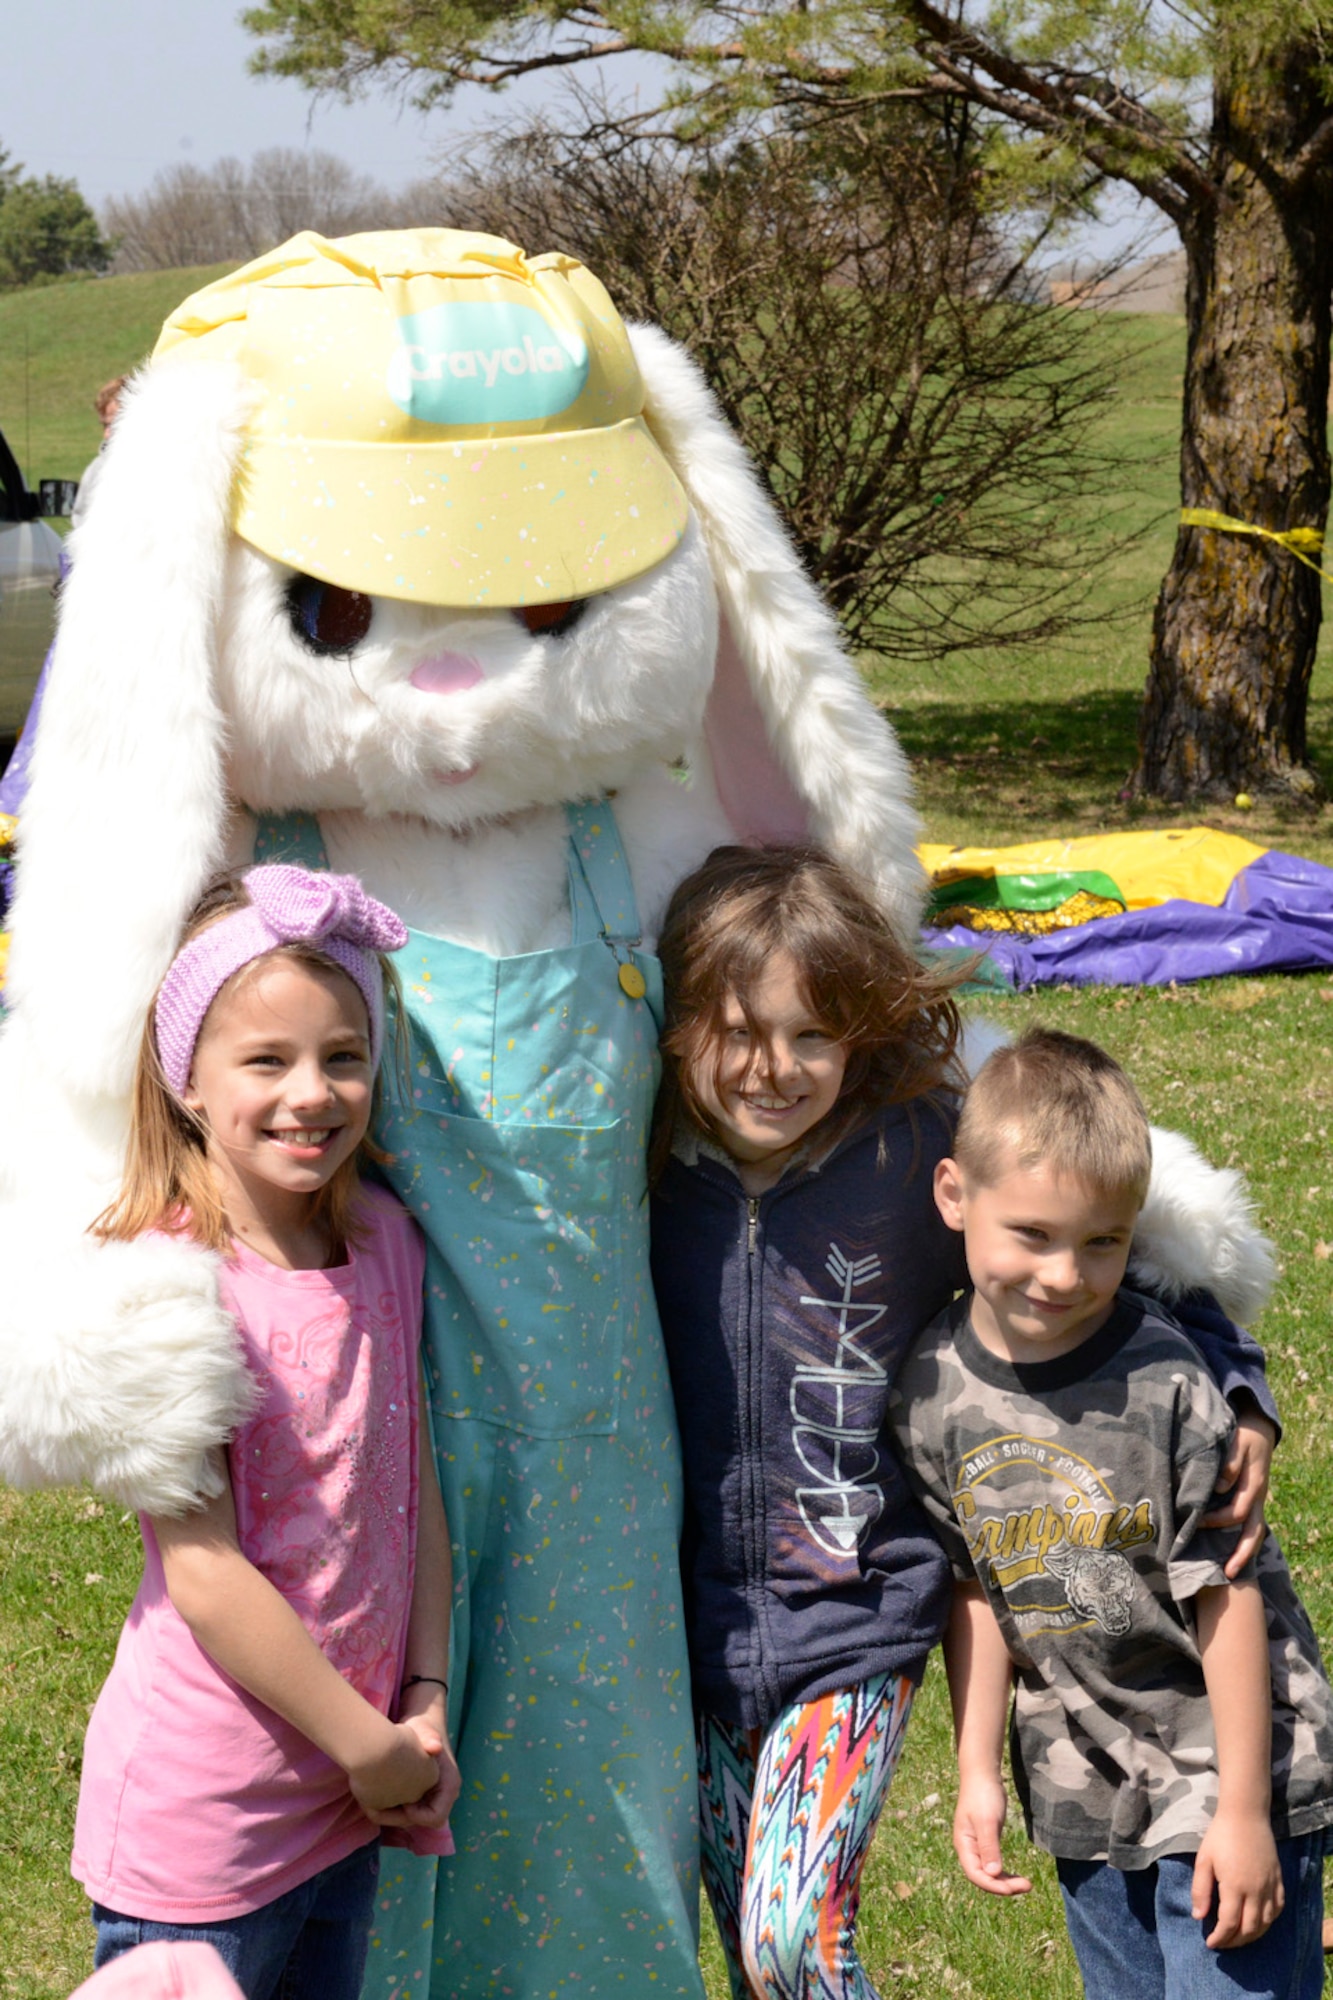 Madison (left), Mackenzie (middle) and Marik (right), children of Melissa and Tech Sgt. Michael McGhee, have their photo taken with the Easter Bunny during the 2015 Annual Easter Egg Hunt held outside of the Dining Facility of the 132d Wing, Des Moines, Iowa on Saturday, April 11, 2015.  (U.S. Air National Guard photo by Tech. Sgt. Michael B. McGhee/Released)